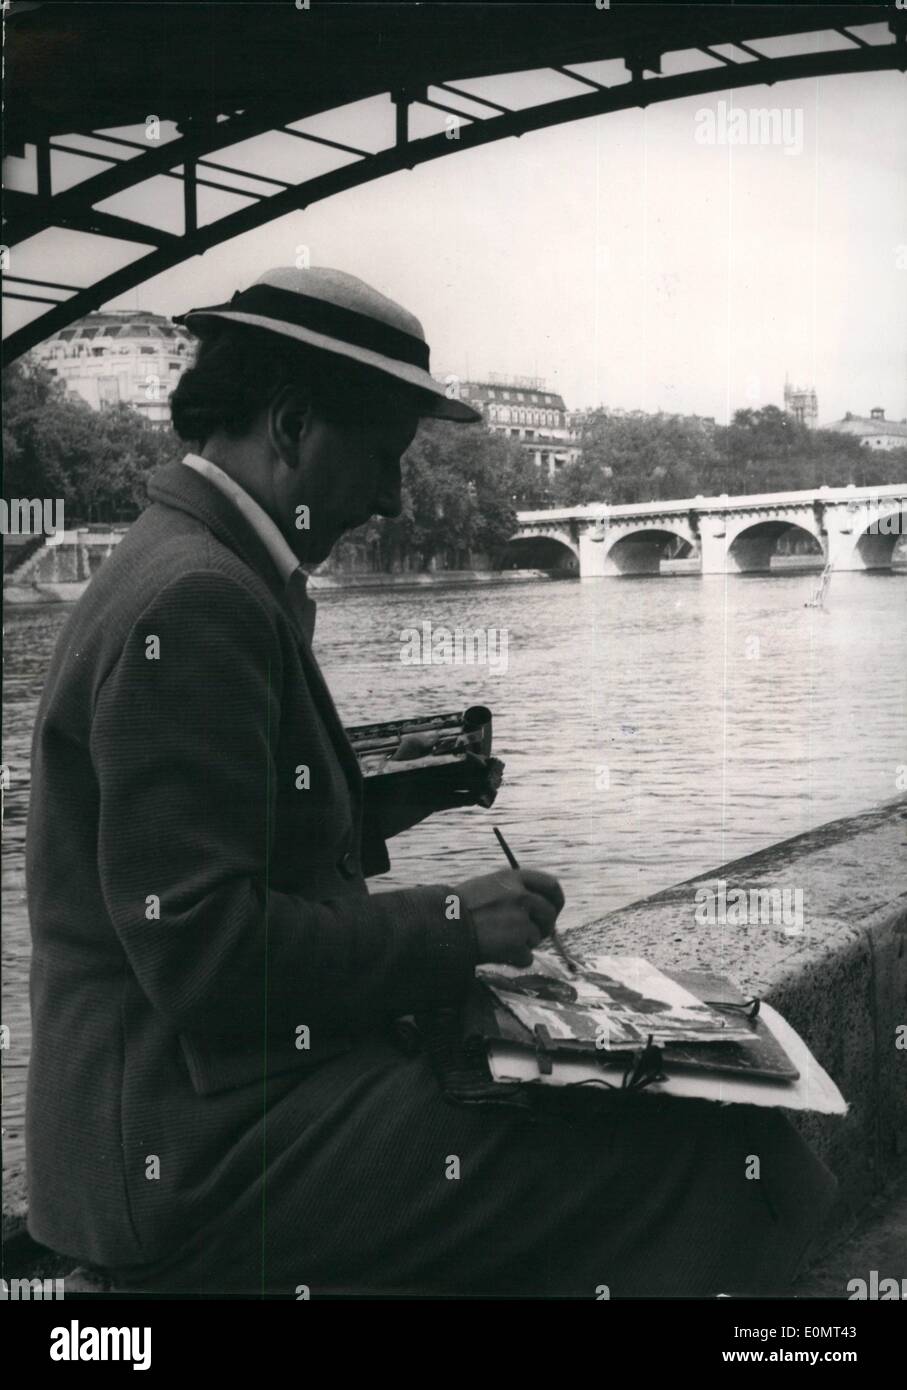 Jun. 06, 1956 - Painting the Seine. An English Artist painting a Paris Scenery from the Seine Embankment. Stock Photo